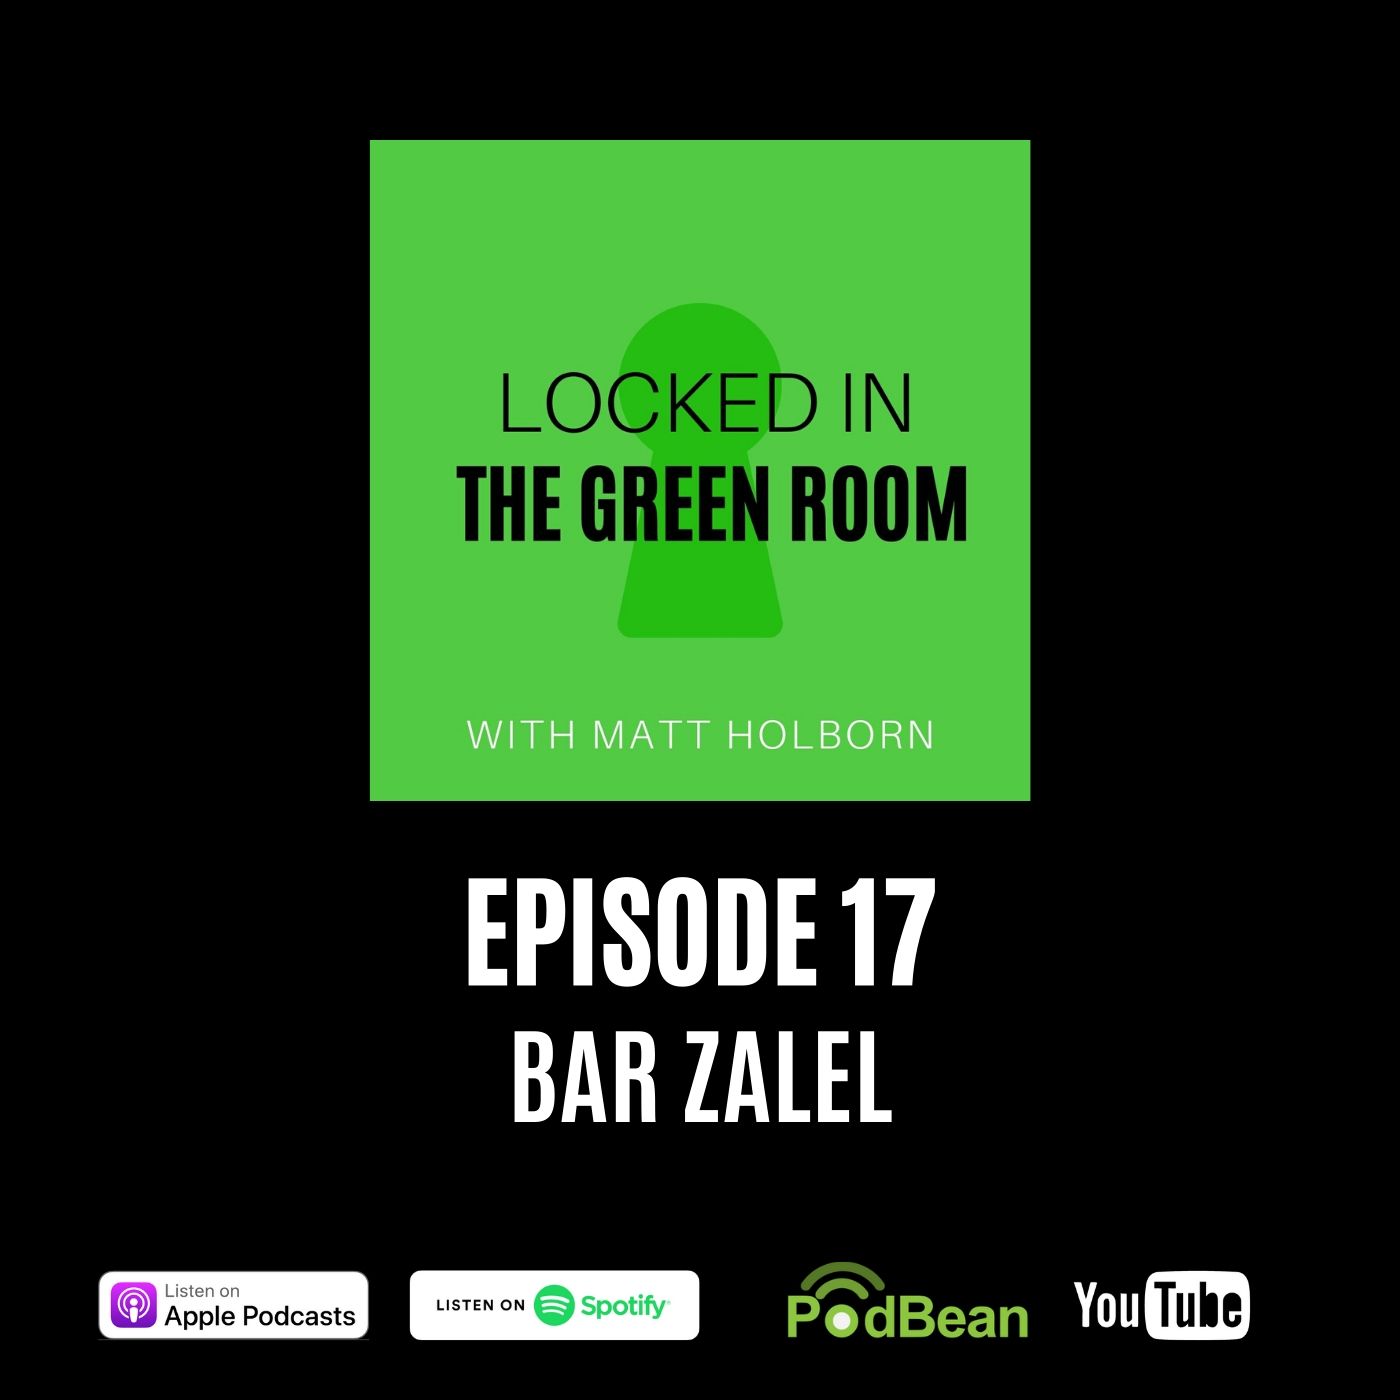 #17 Bar Zalel : Producing spontaneous music over the internet